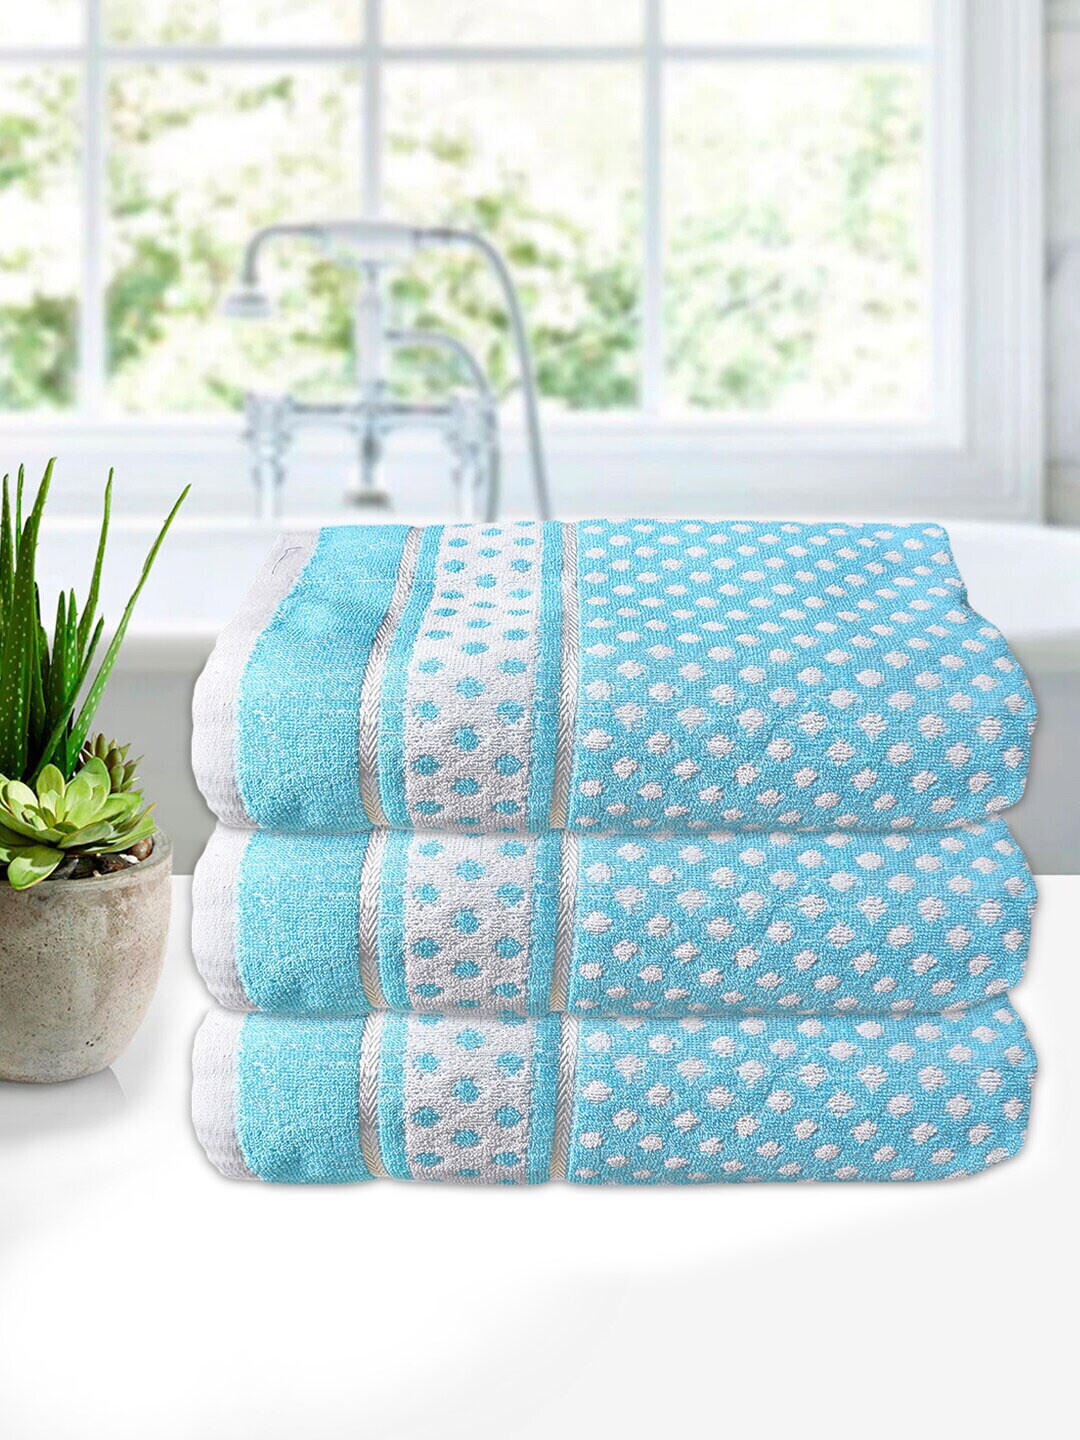 Kuber Industries Unisex Set of 3 Blue & White Printed 400 GSM Soft Cotton Bath Towels Price in India